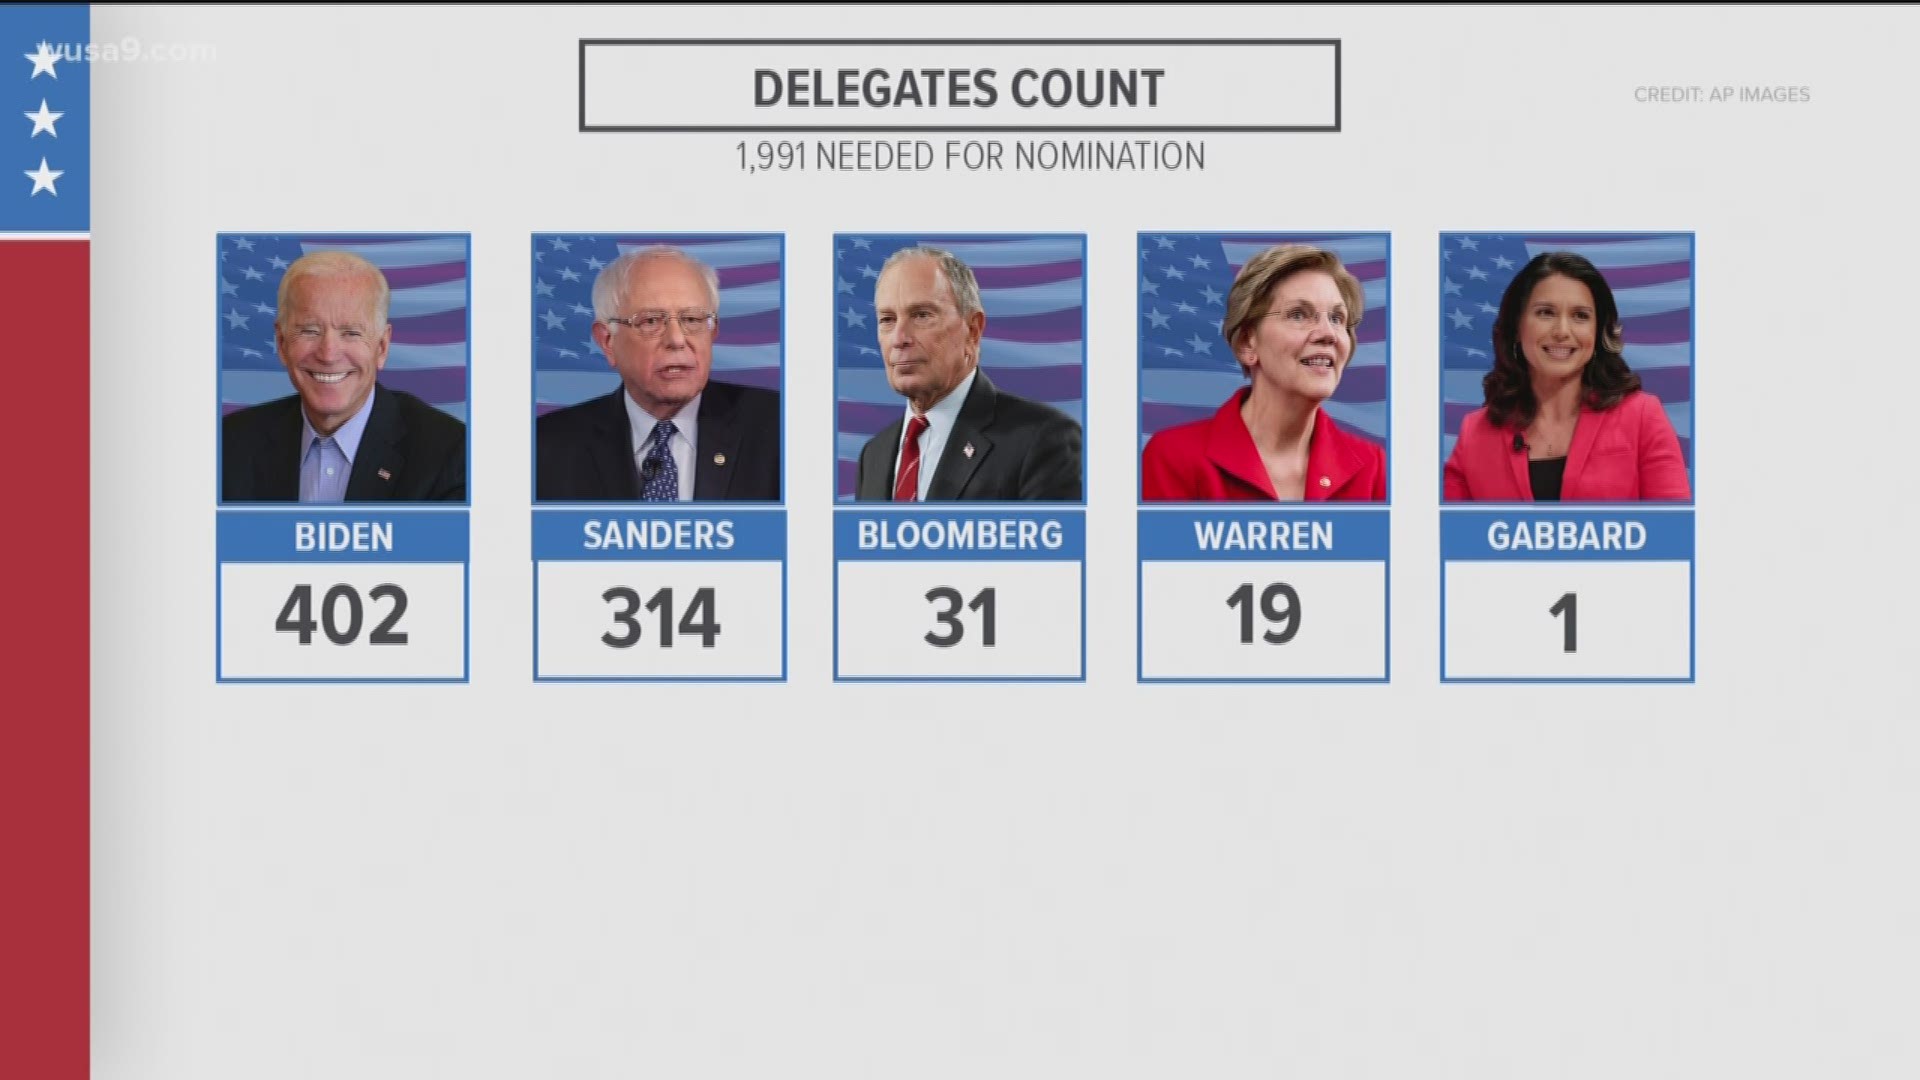 Results for Super Tuesday are still rolling in, but early returns show former Vice President Joe Biden and Sen. Bernie Sanders taking much of the delegate count.